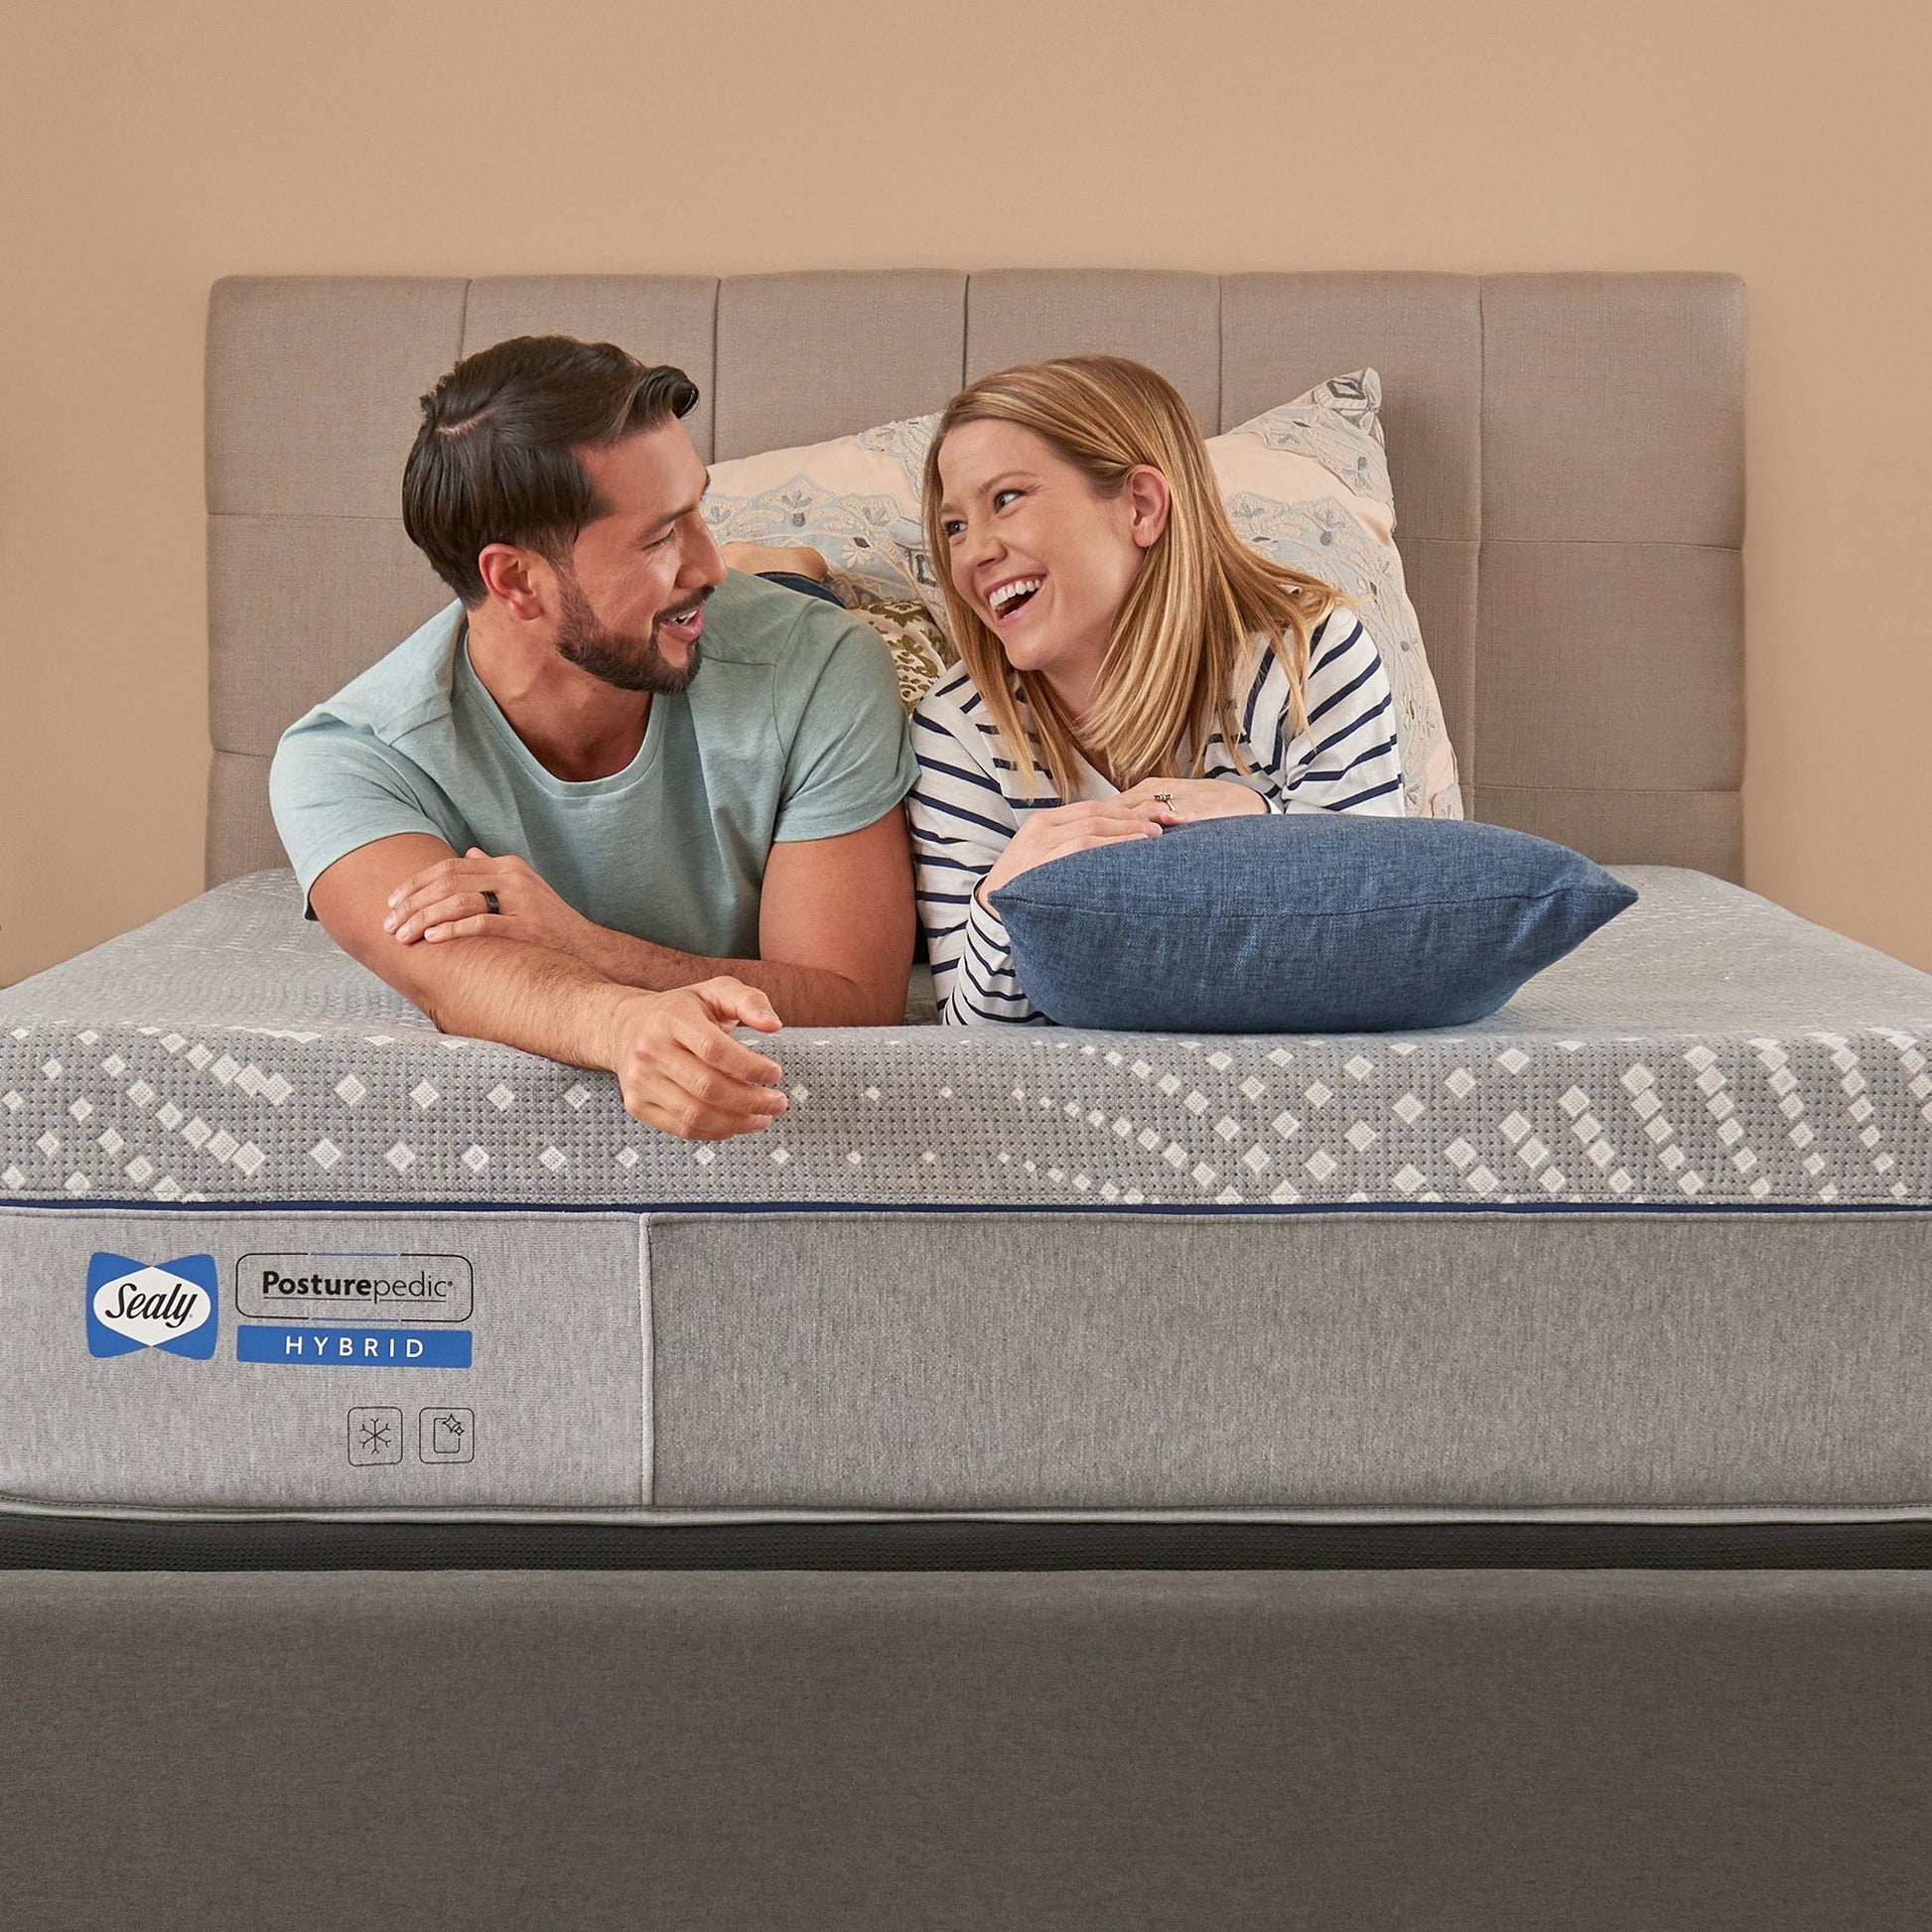 Sealy Hybrid Haralson Soft Mattress In Bedroom Couple Relaxing